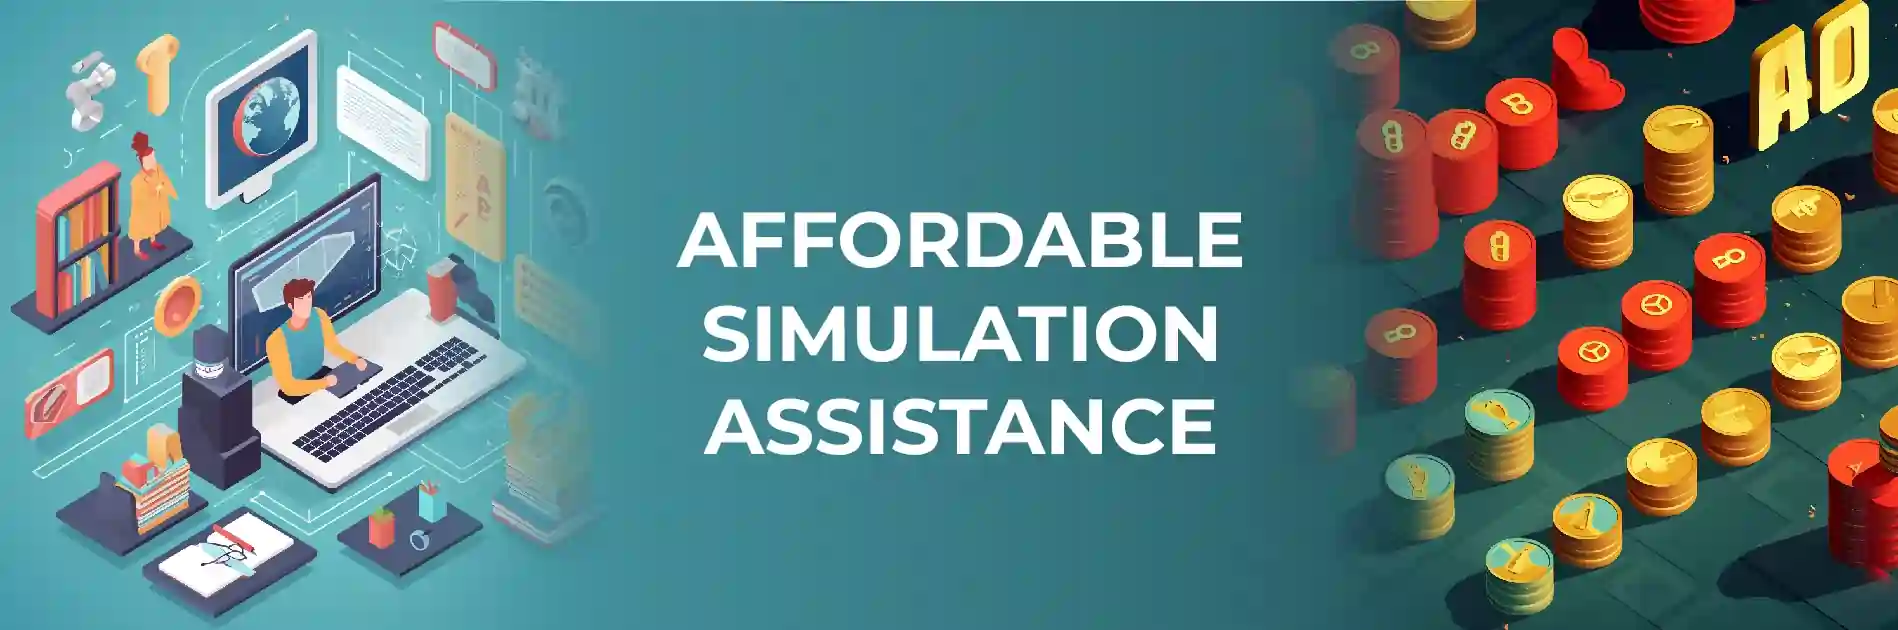 Excellent Simulation Assignment Help at Pocket-friendly Prices